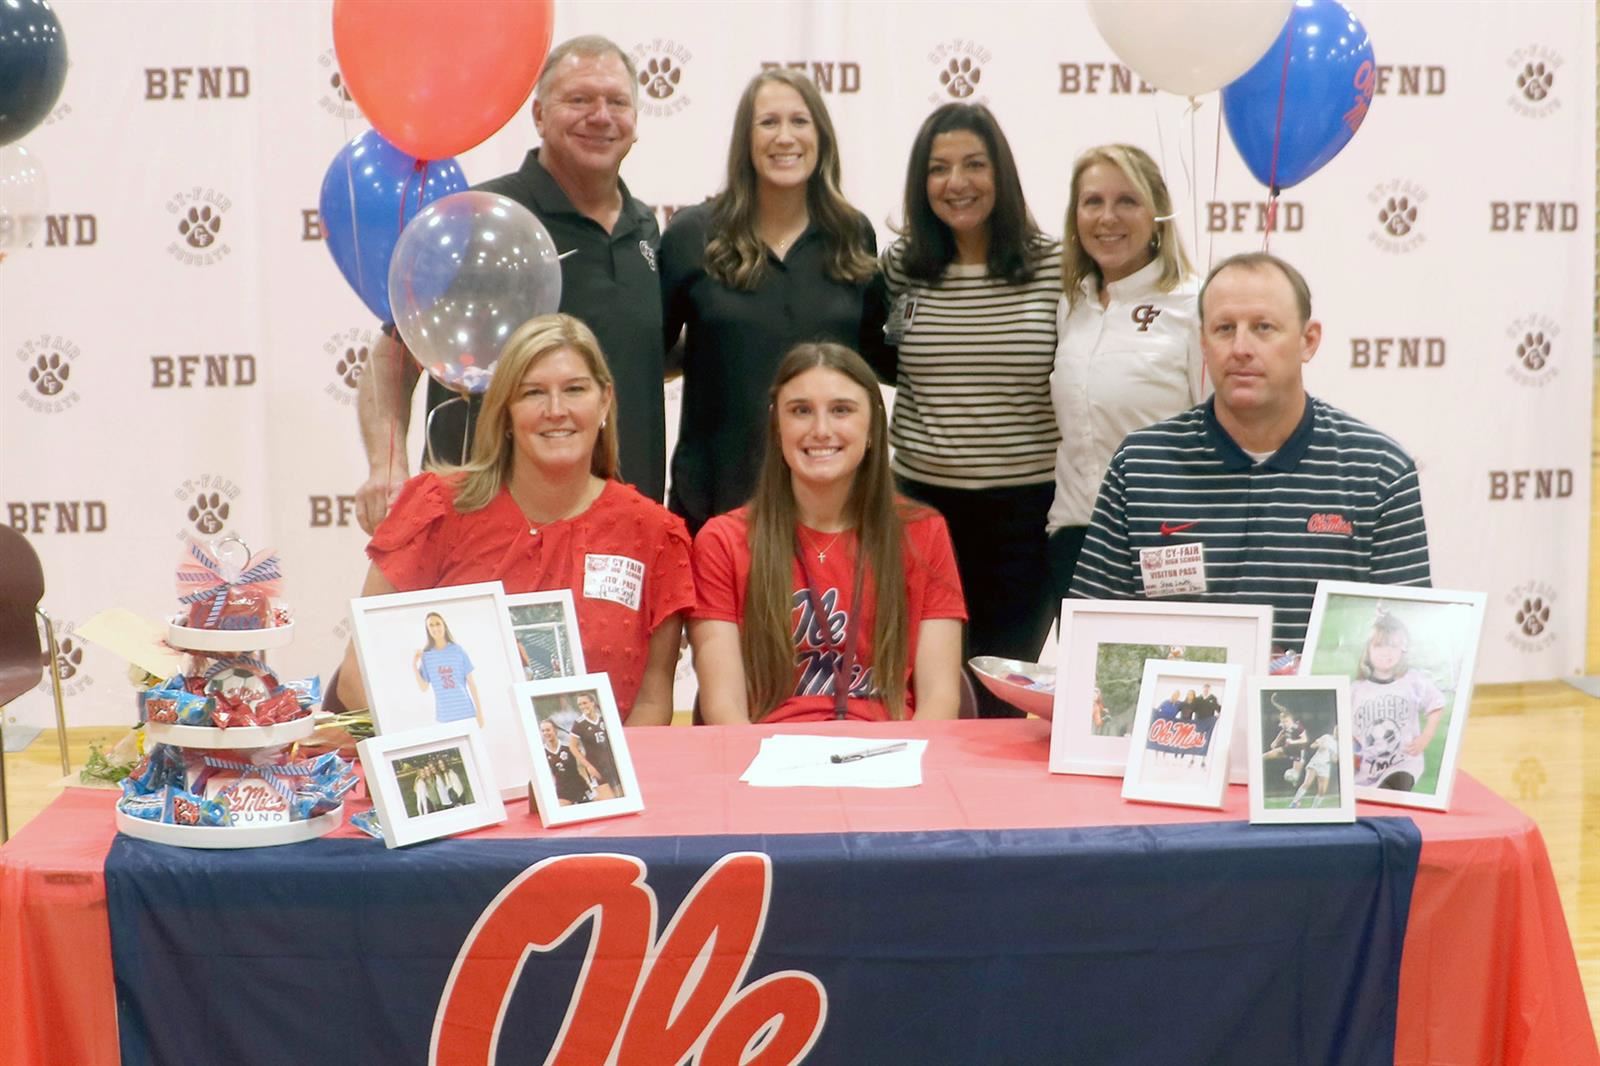 Cy-Fair High School senior Grace Smith signed a letter of intent to play soccer at the University of Mississippi.